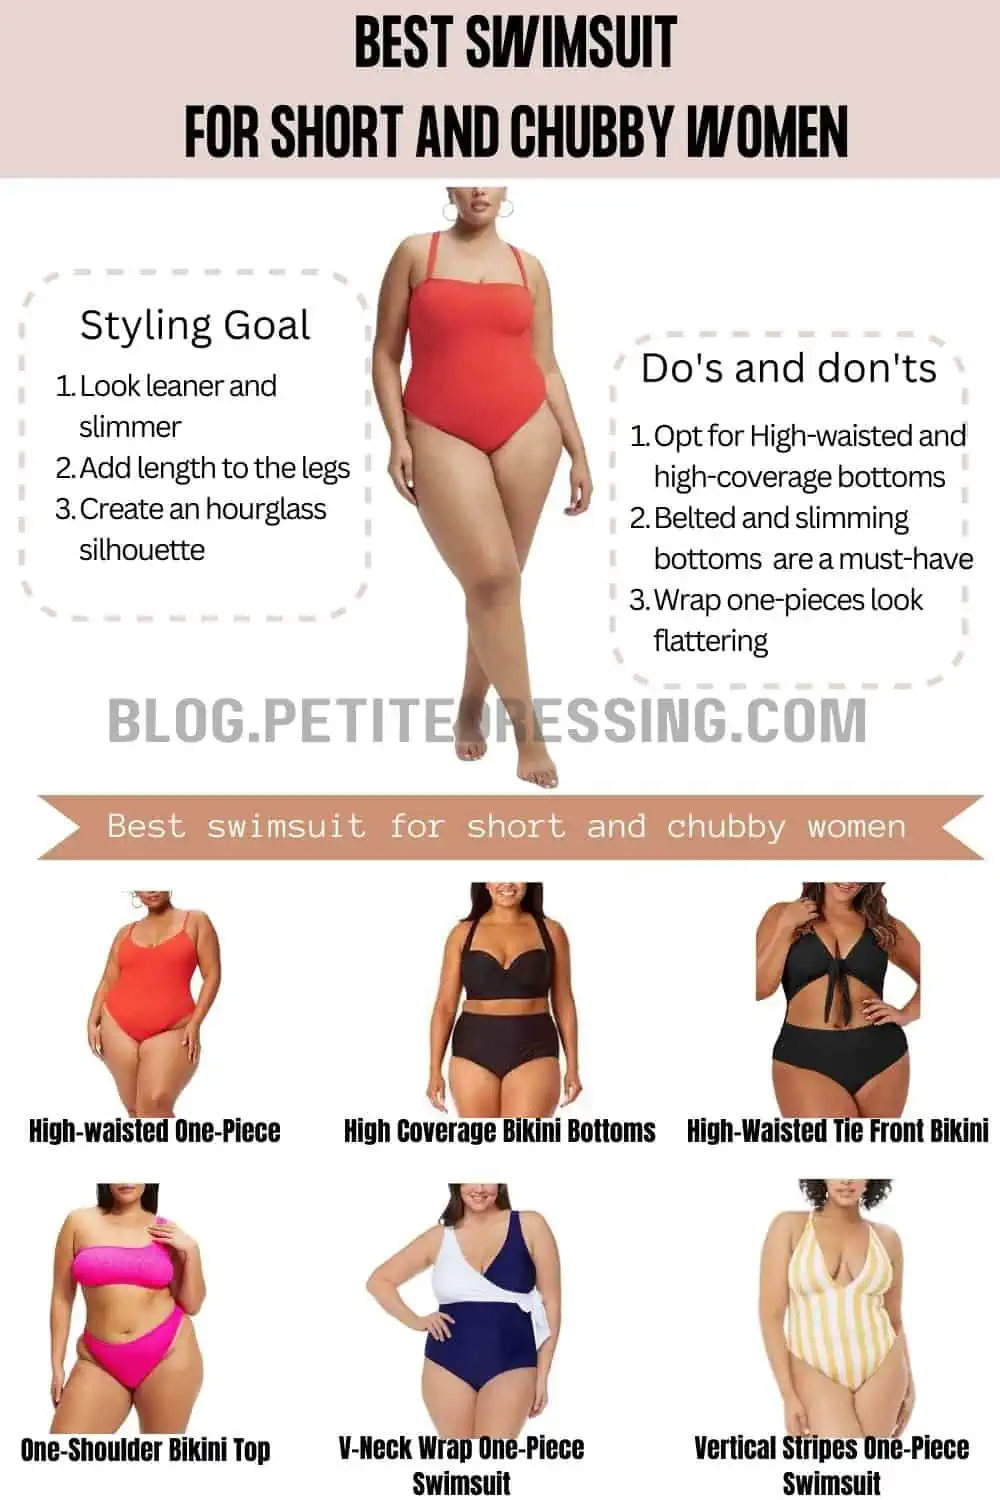 Swimsuits guide for women with a short torso - Petite Dressing